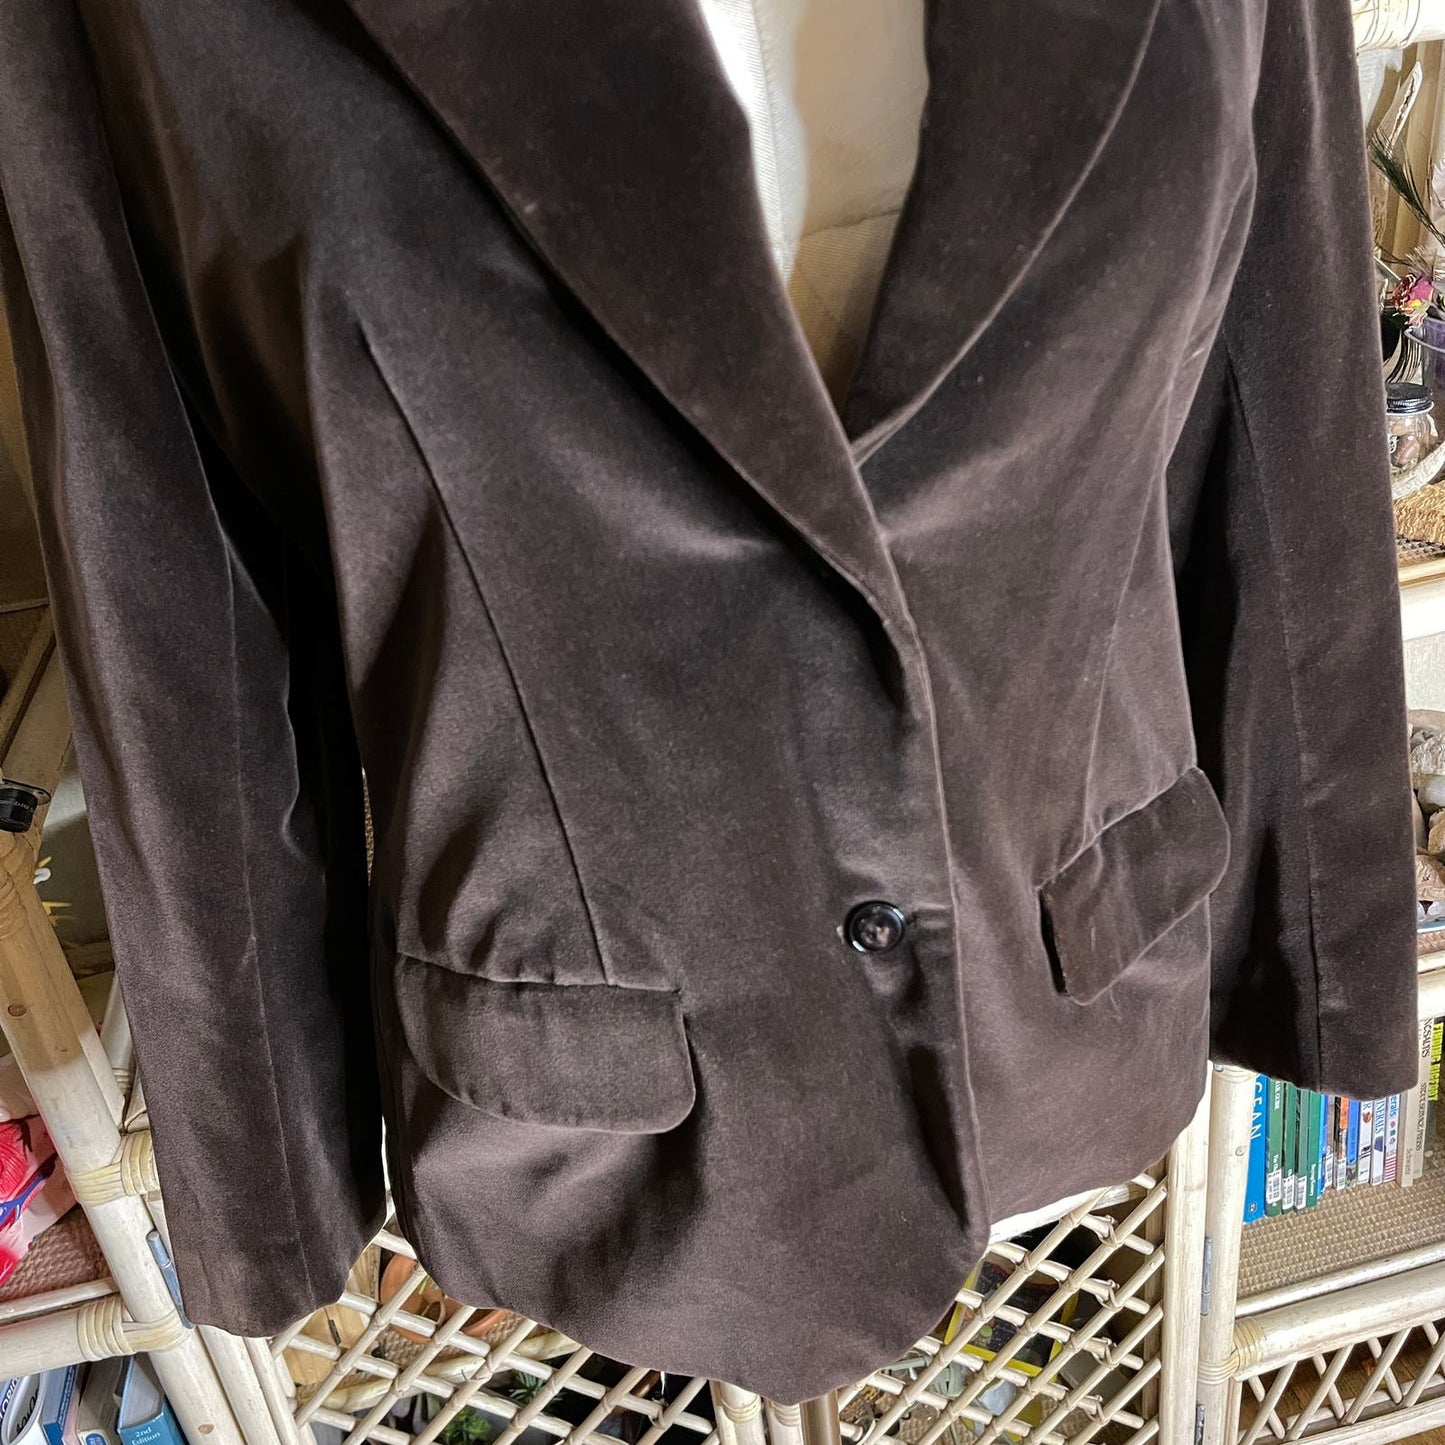 Vintage 70s Dark Brown Velvet Blazer with Double Lapel and Vneck F.A. Chatta 16